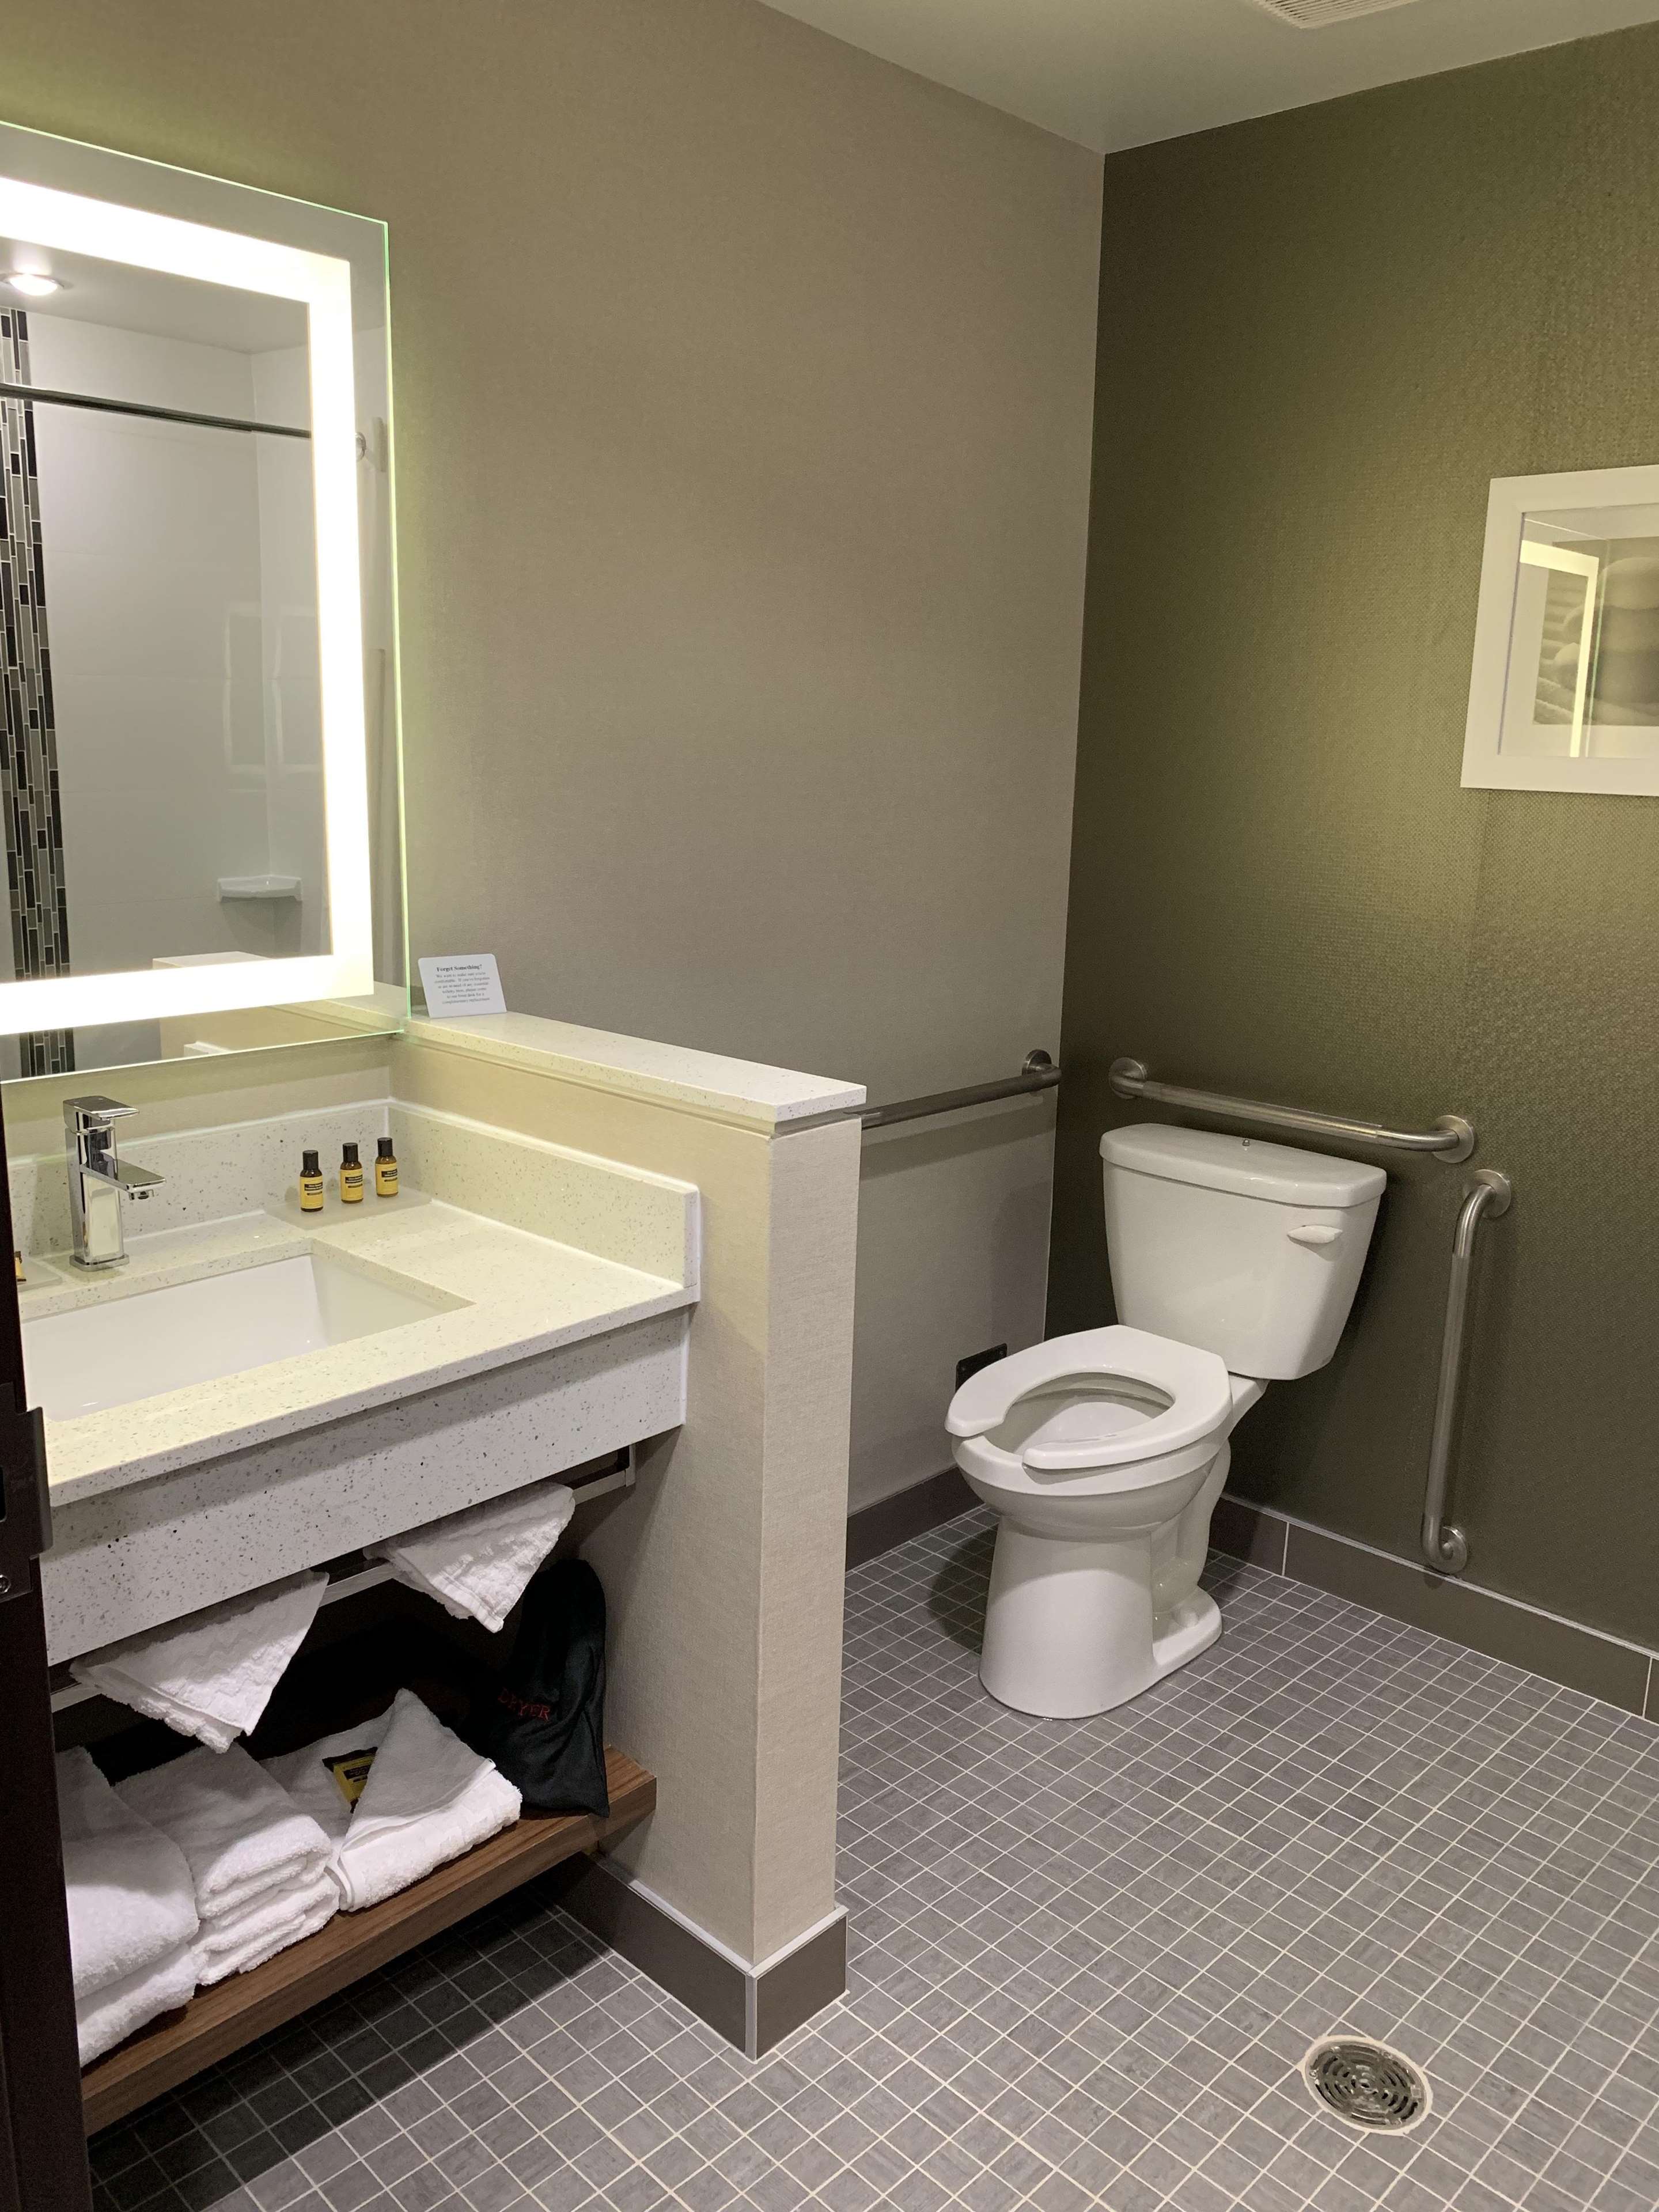 Accessible Room Bathroom with Roll-in Shower Best Western Plus Hinton Inn & Suites Hinton (780)817-7000